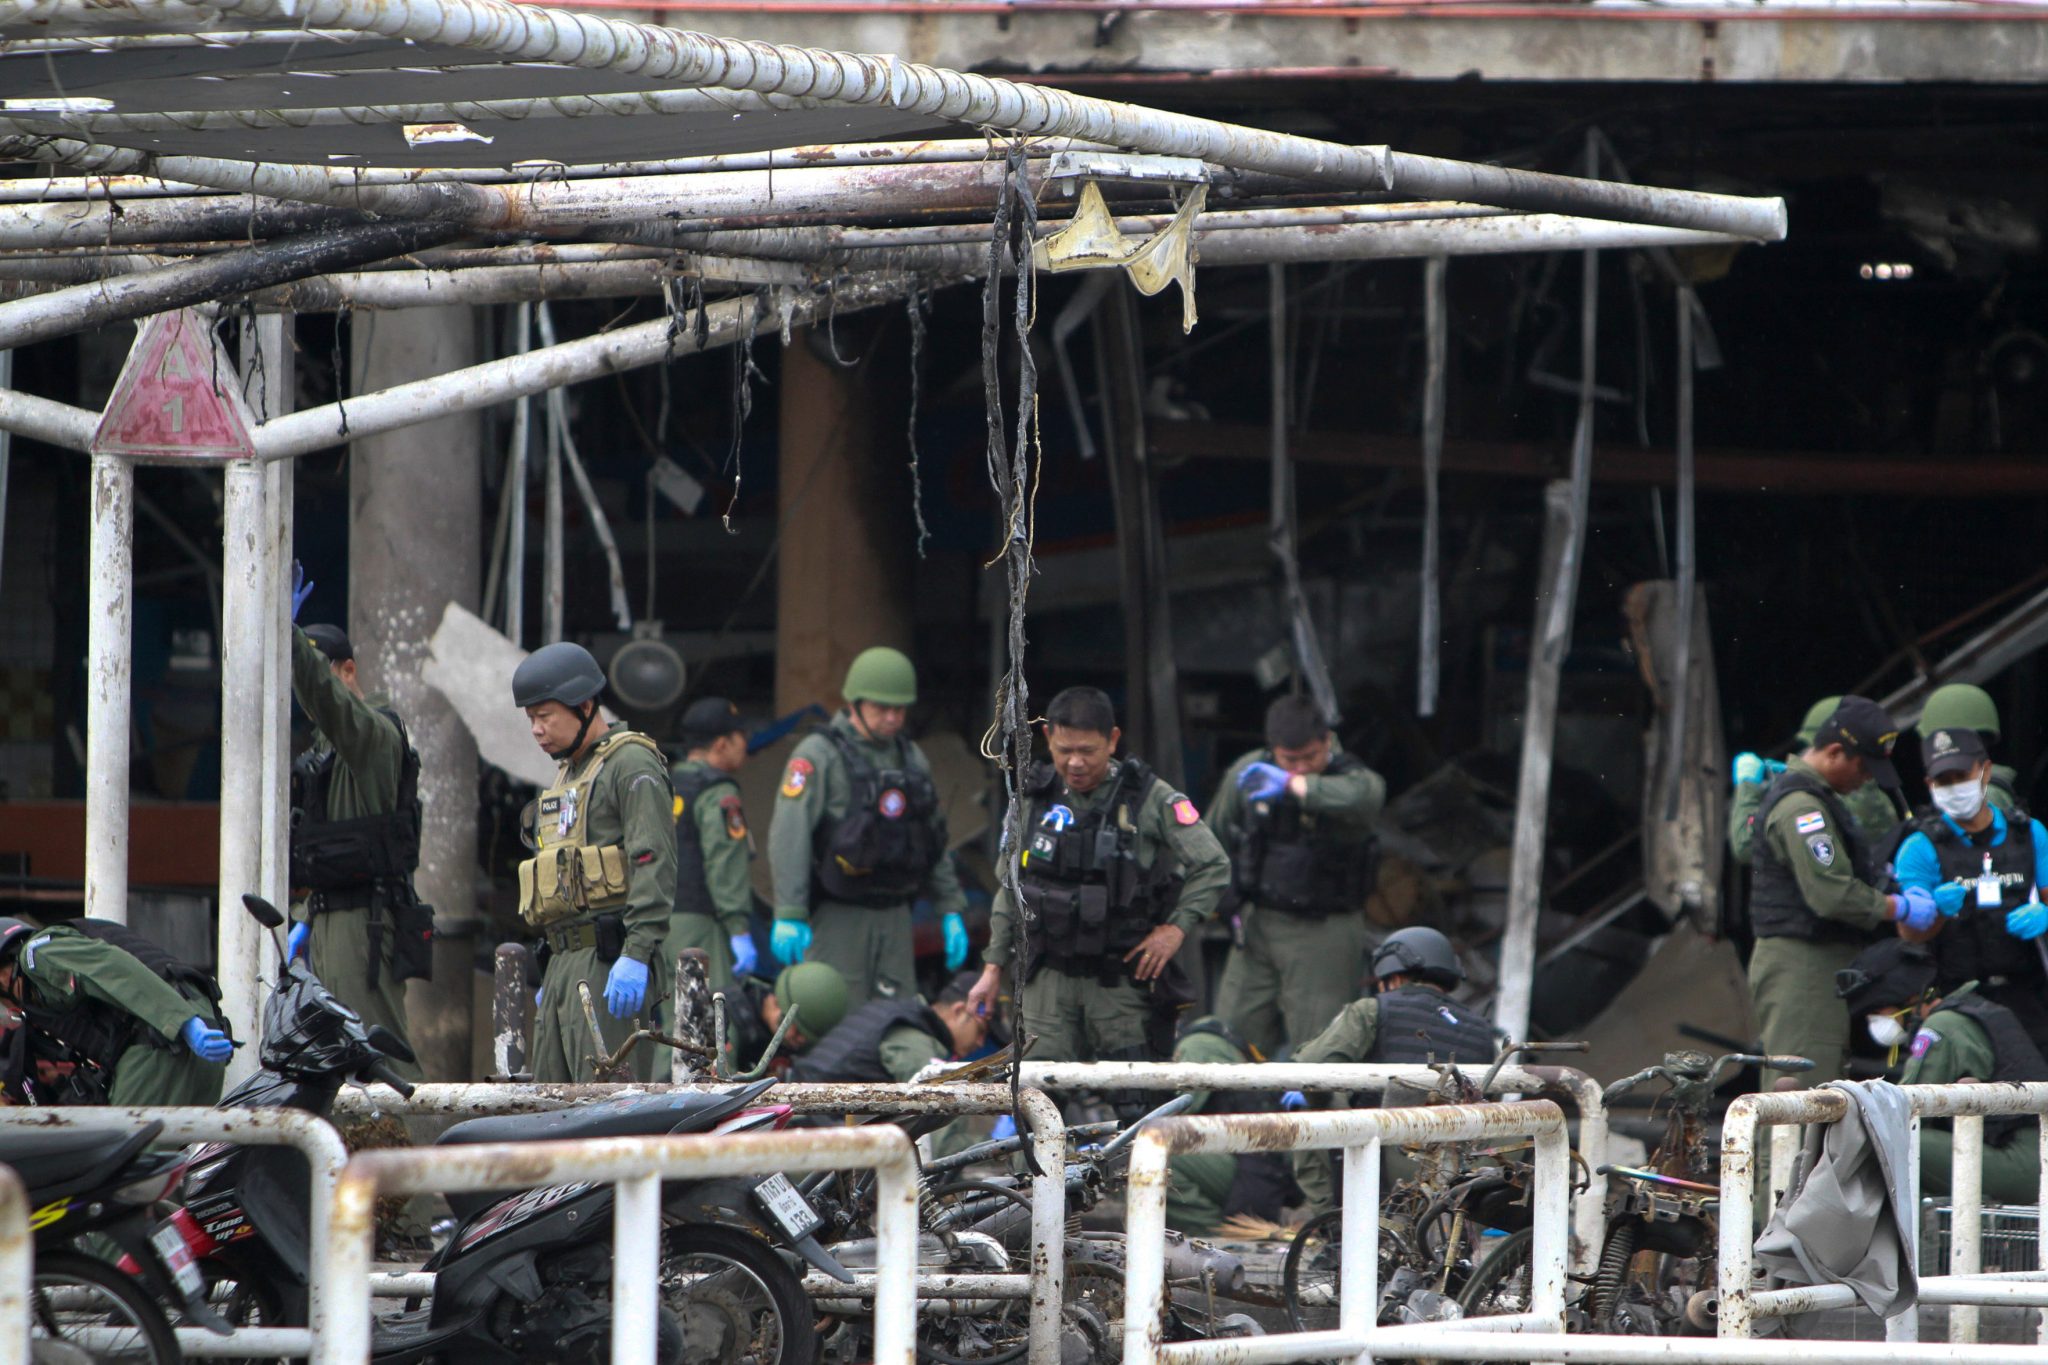 Military personnel inspect the site of a bomb attack at a supermarket in the city of Pattani Thailand | REUTERS